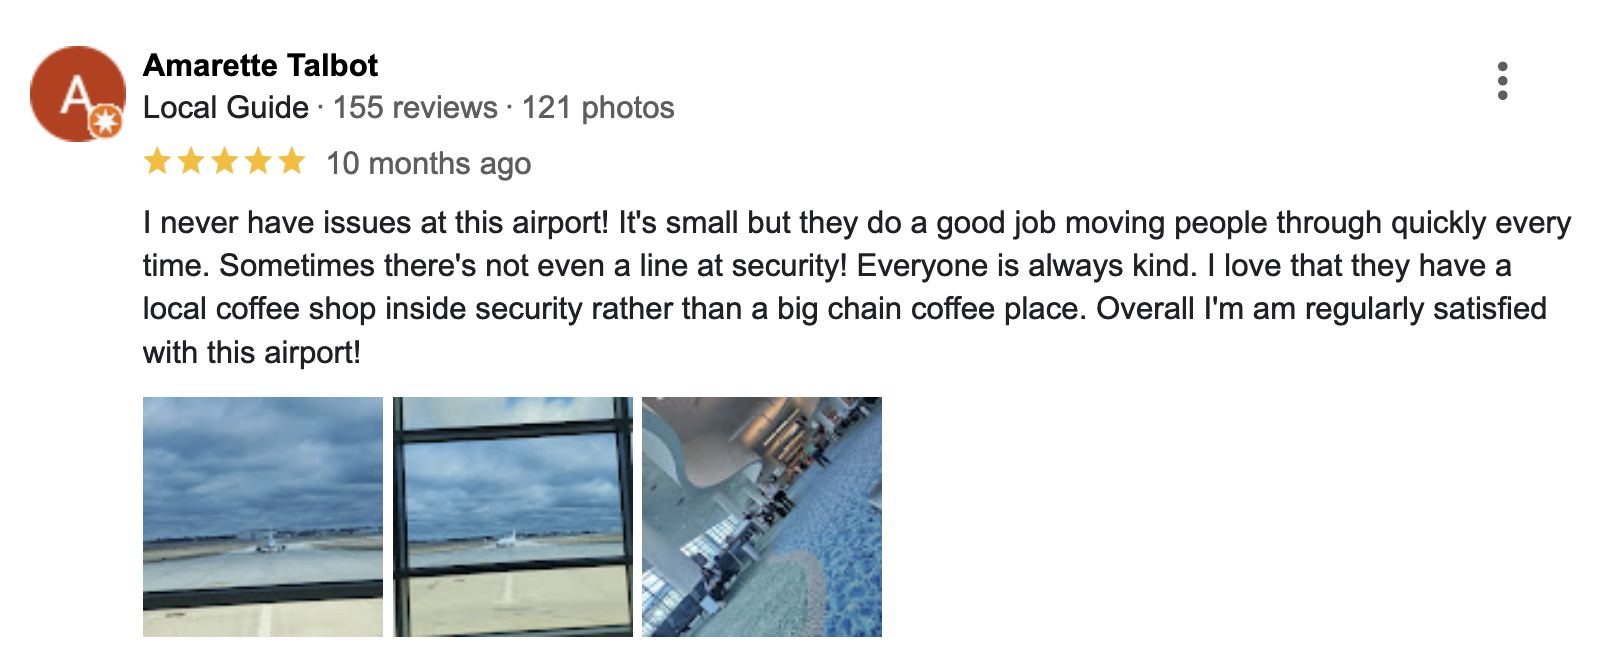 Image of an airport review in which the reviewer generally likes the airport 